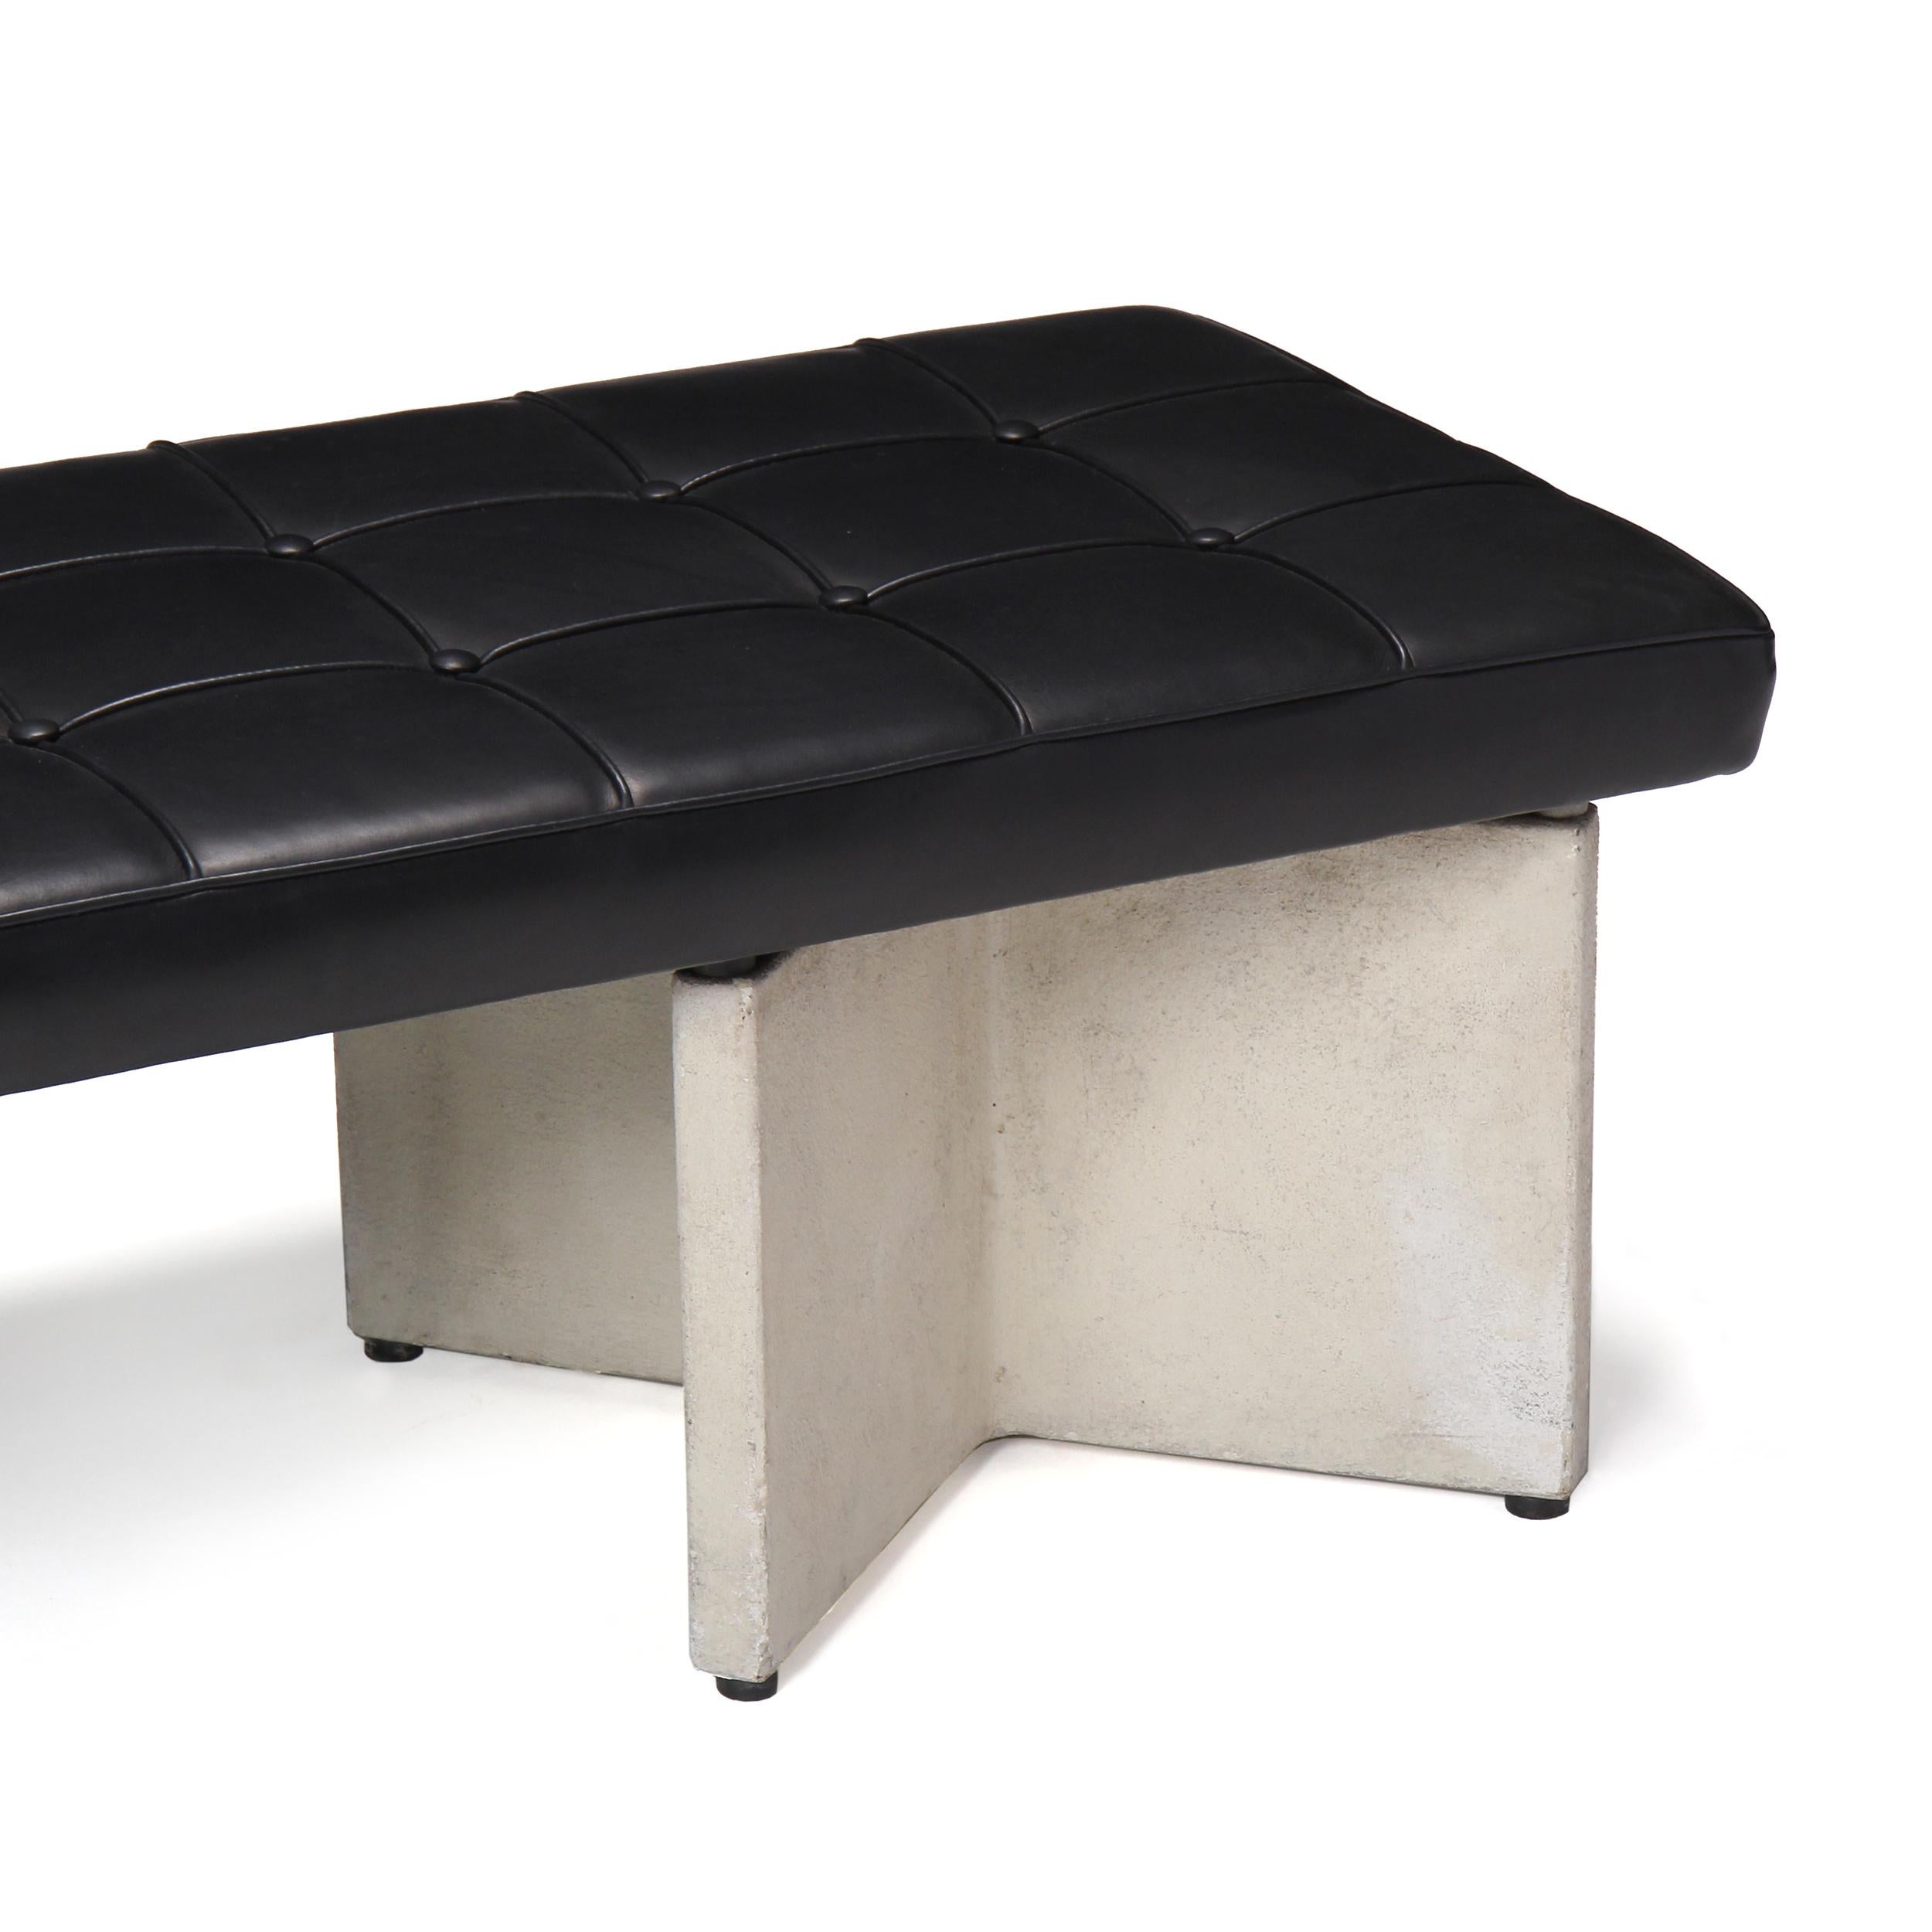 Bauhaus 1950s Concrete and Leather Bench for the Seagram Building by Mies van der Rohe